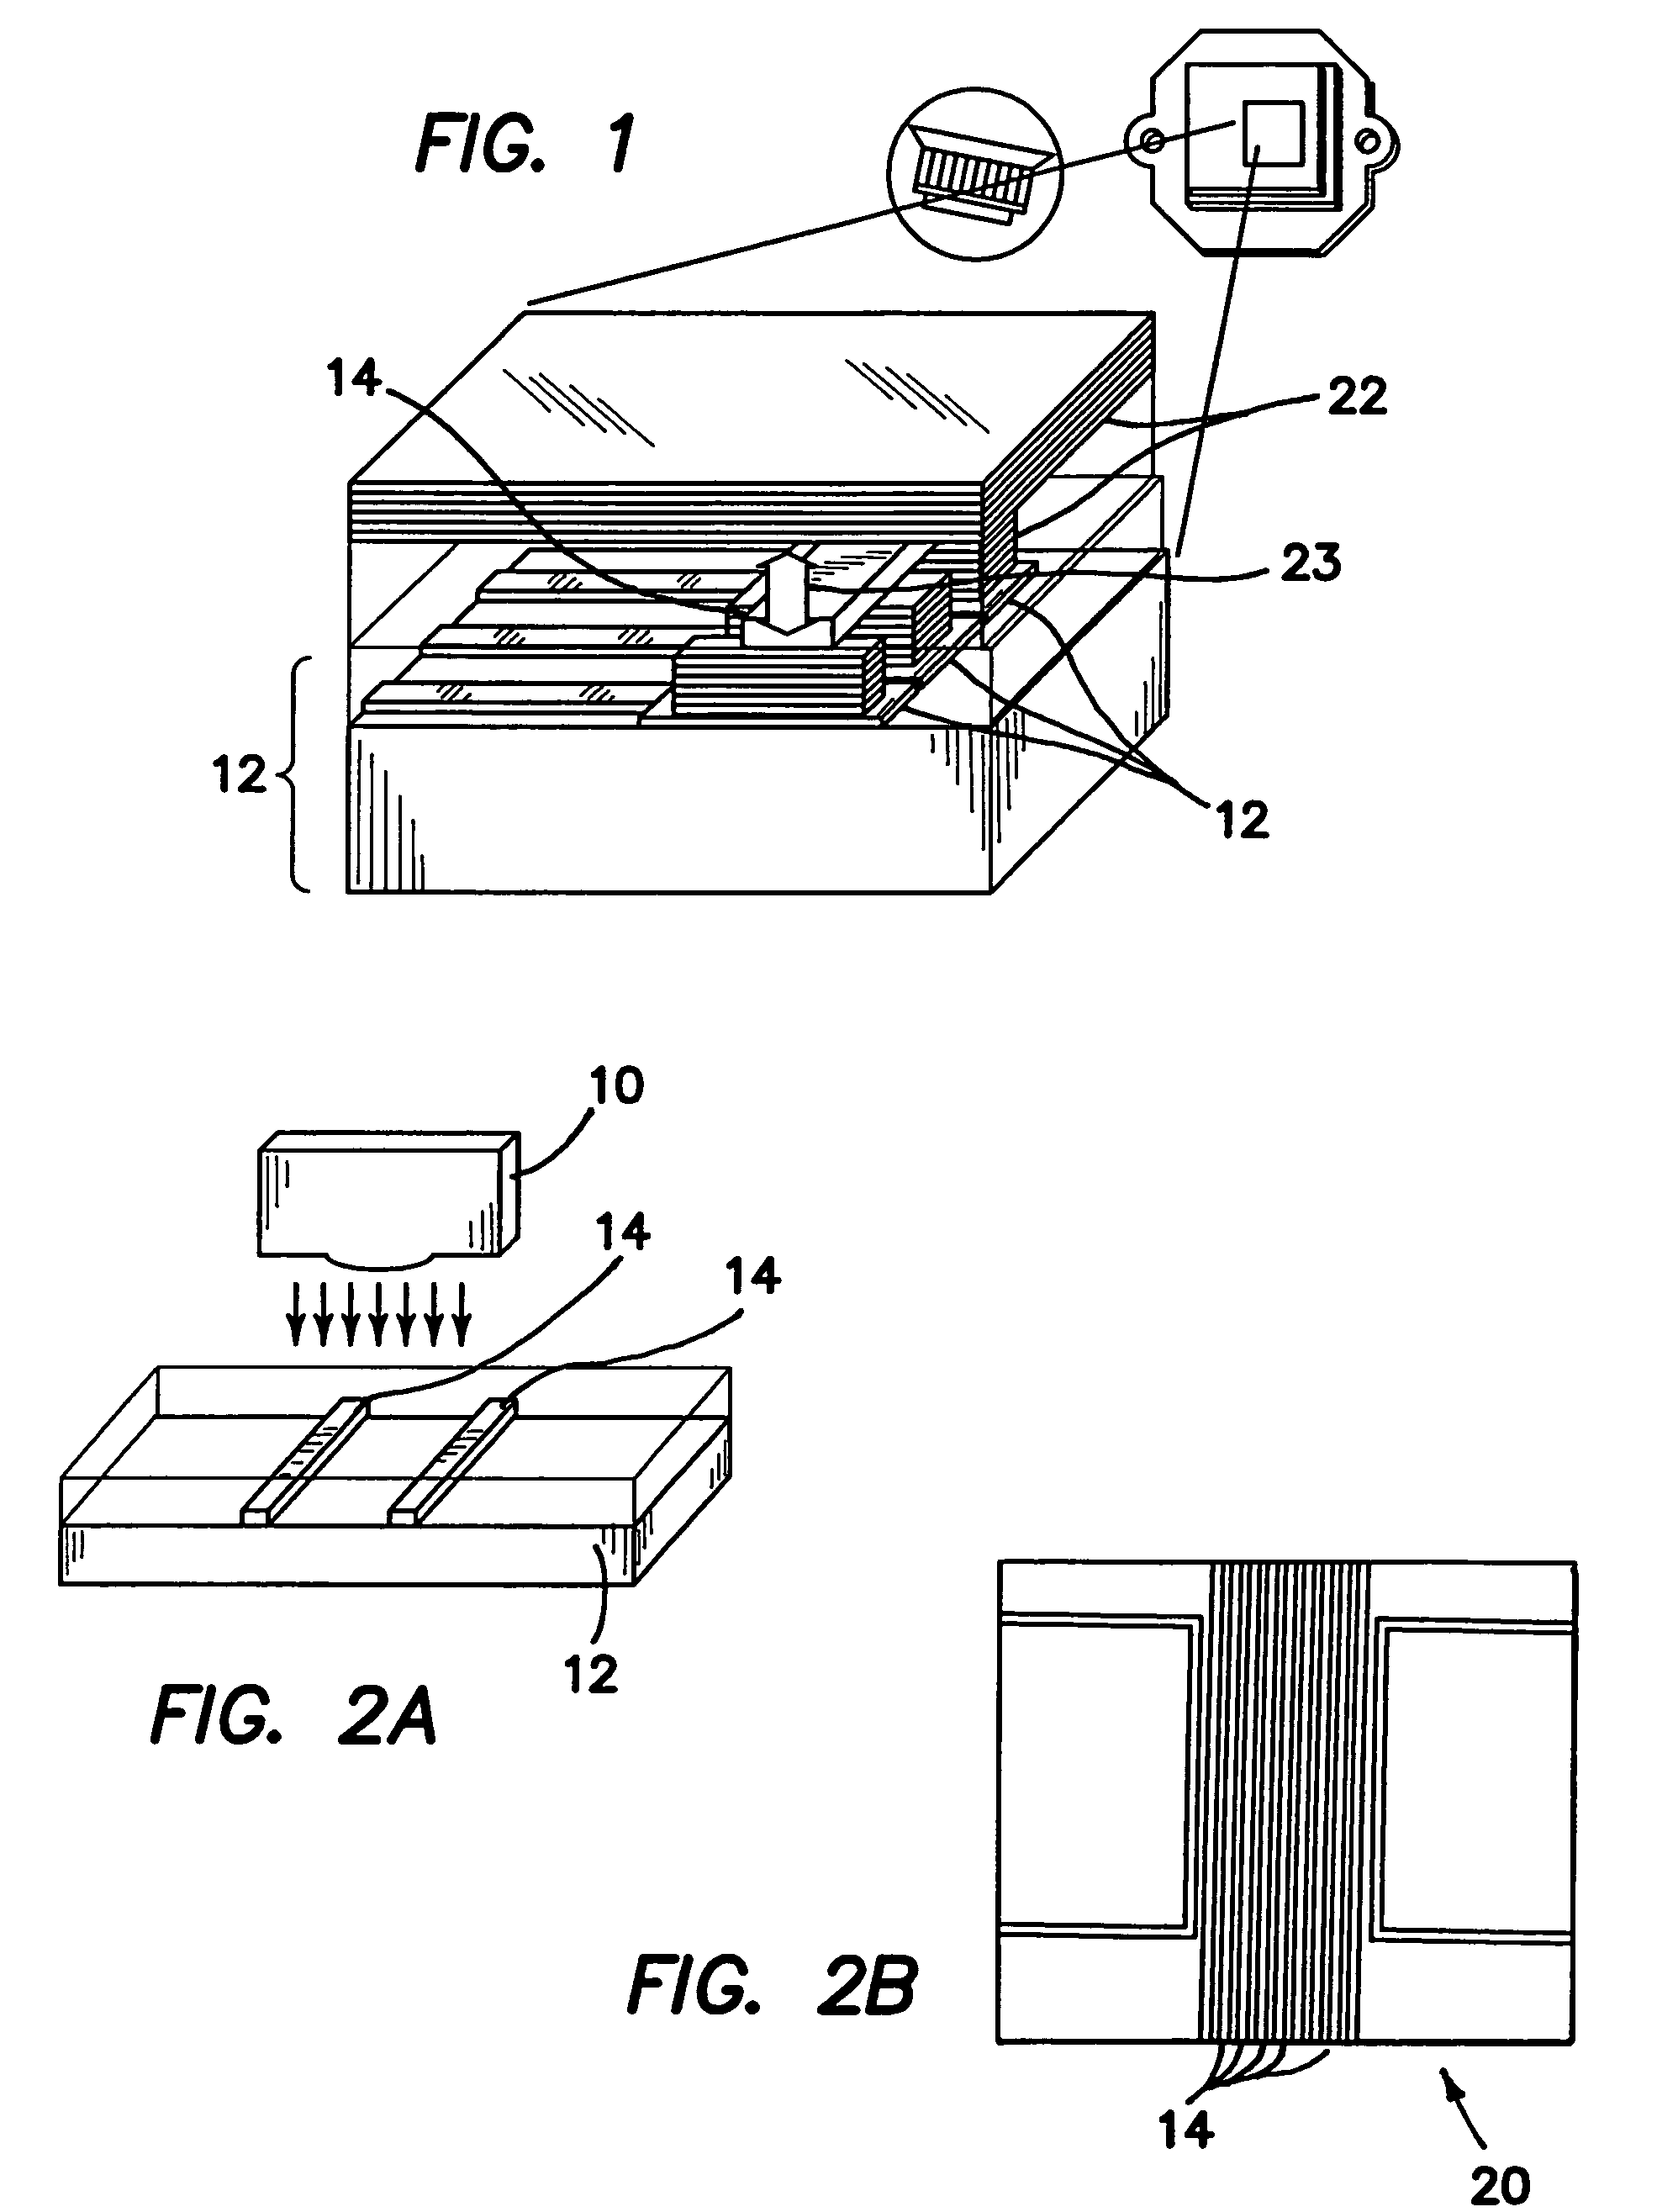 Method and apparatus for CMOS imagers and spectroscopy